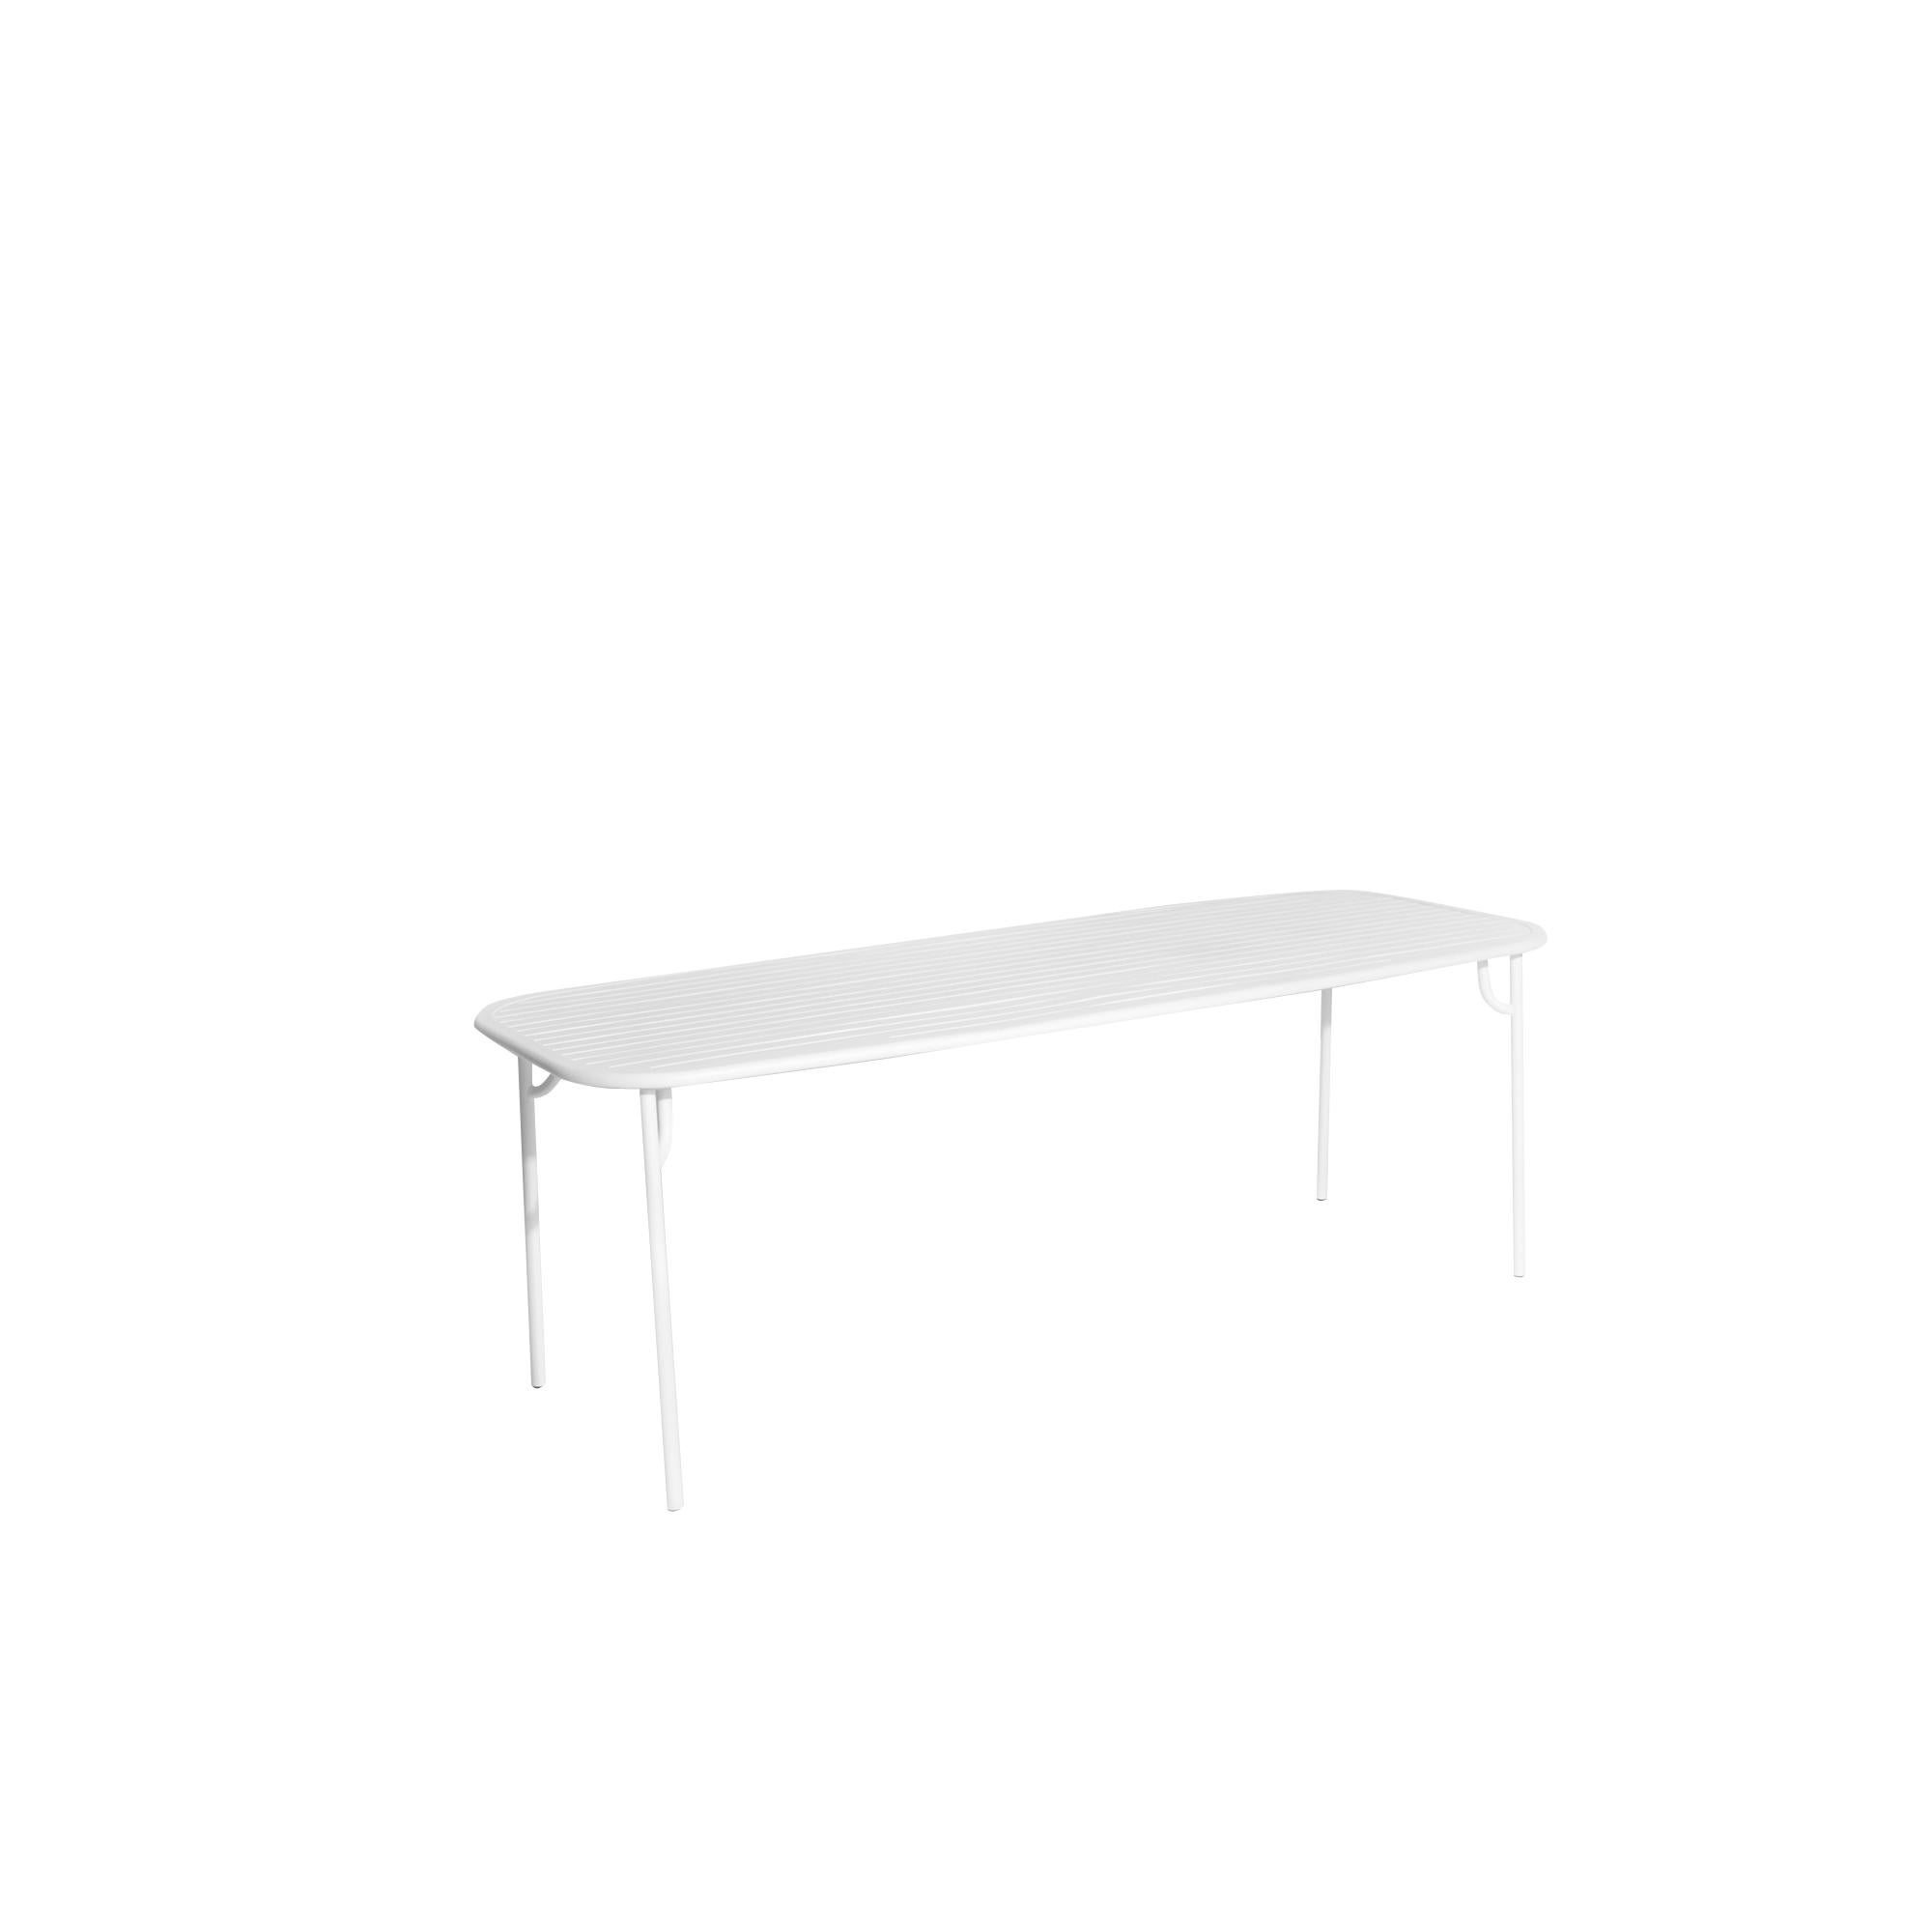 Petite Friture Week-End Large Rectangular Dining Table in White Aluminium with Slats by Studio BrichetZiegler, 2017

The week-end collection is a full range of outdoor furniture, in aluminium grained epoxy paint, matt finish, that includes 18